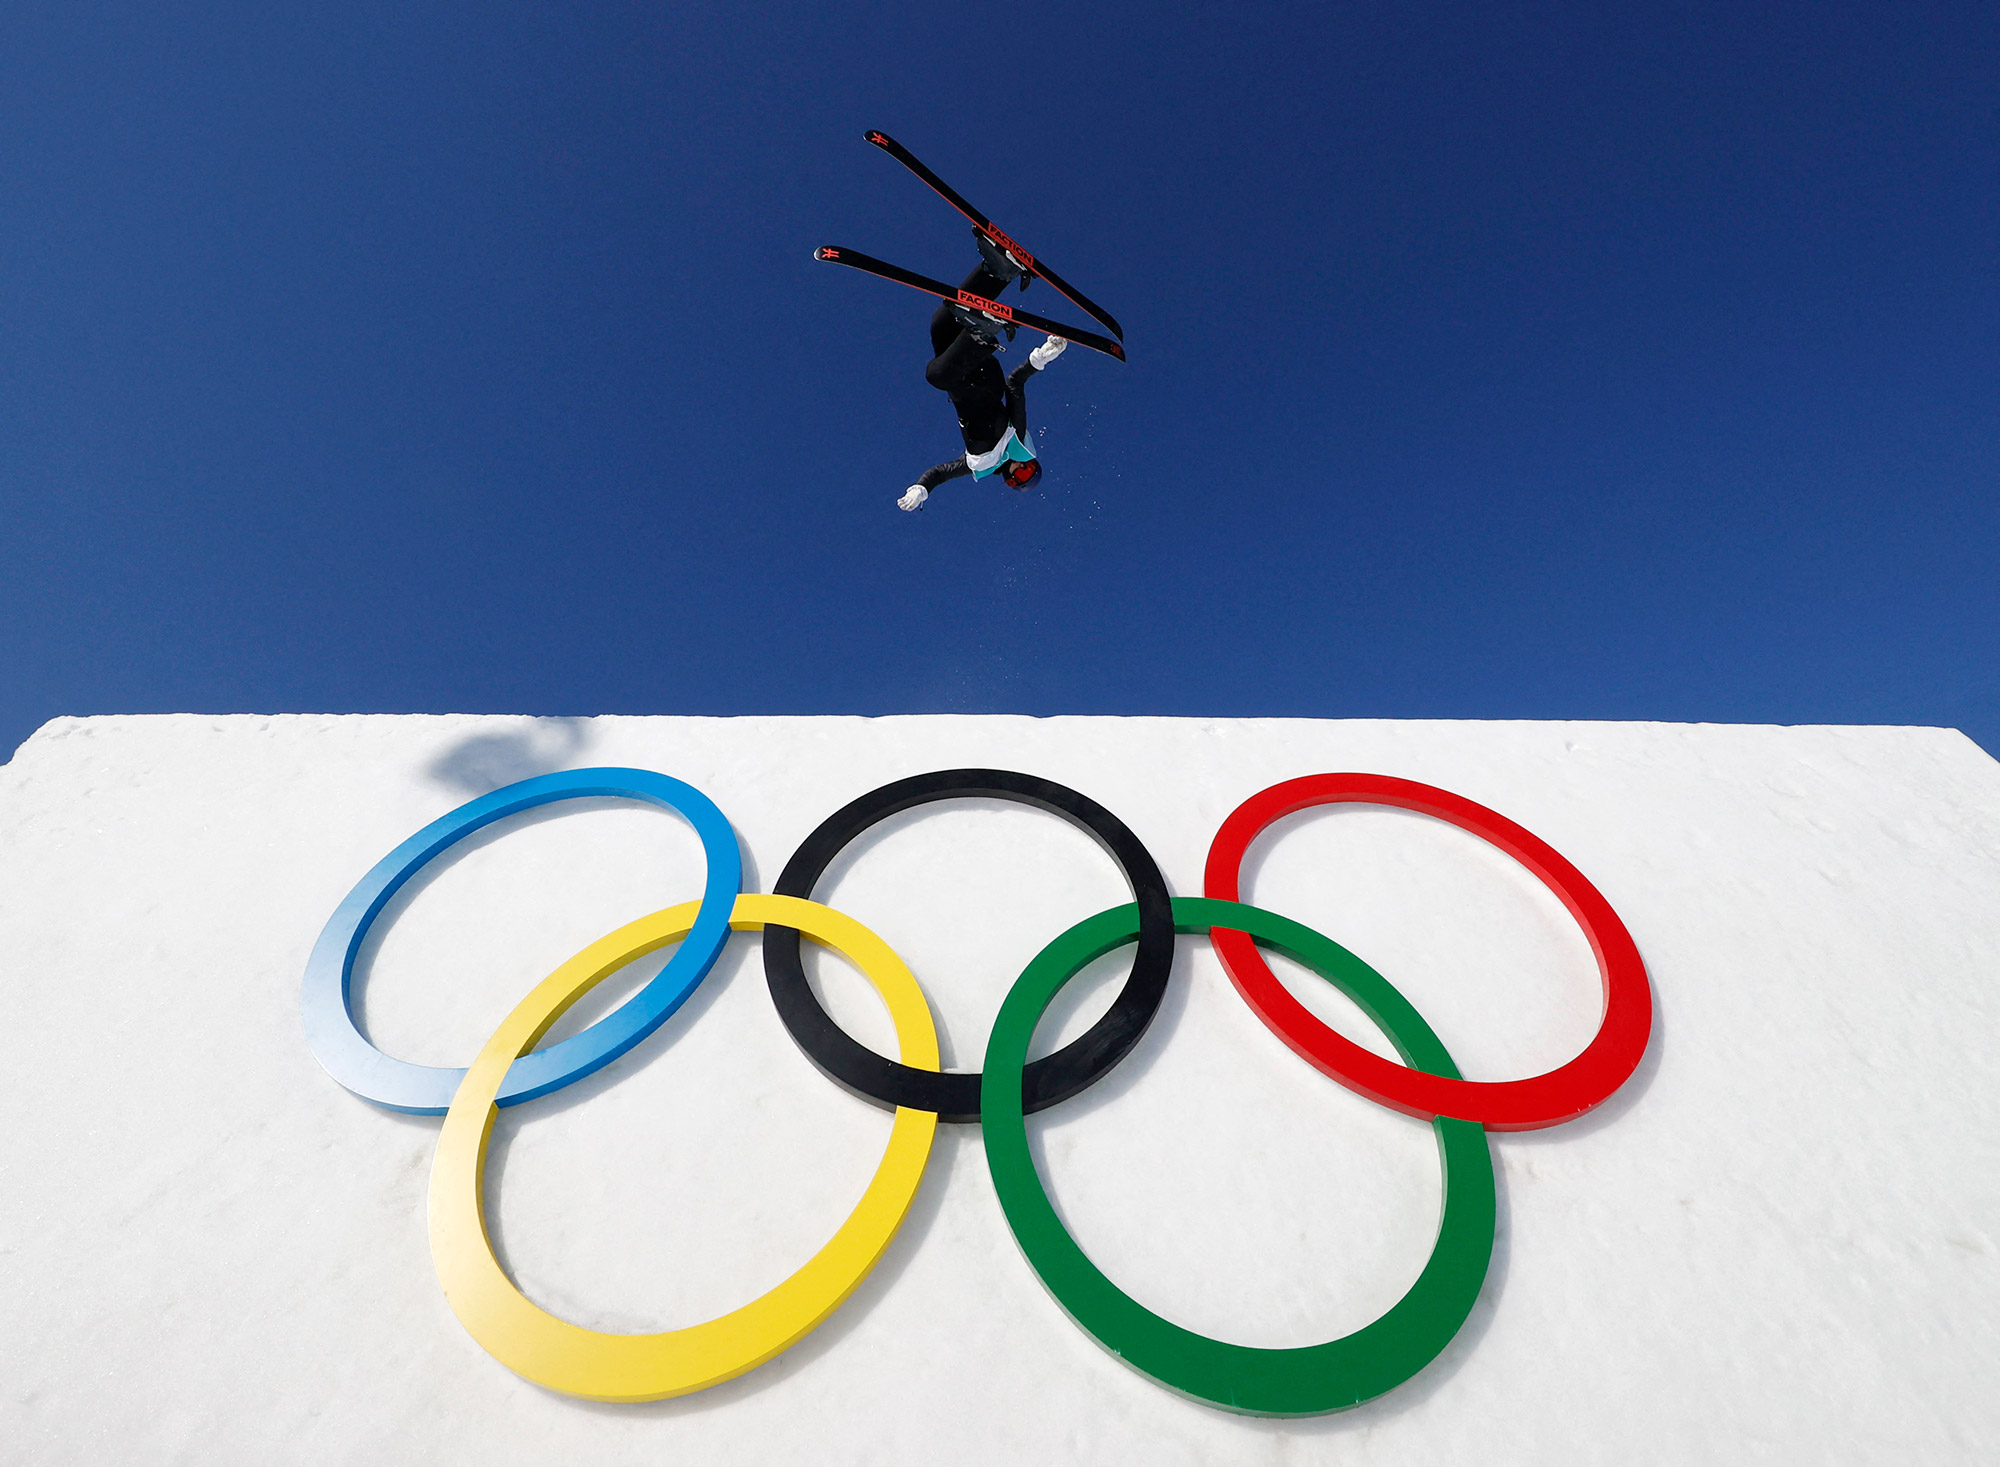 China's Eileen Gu makes her final run in the big air competition on Tuesday.